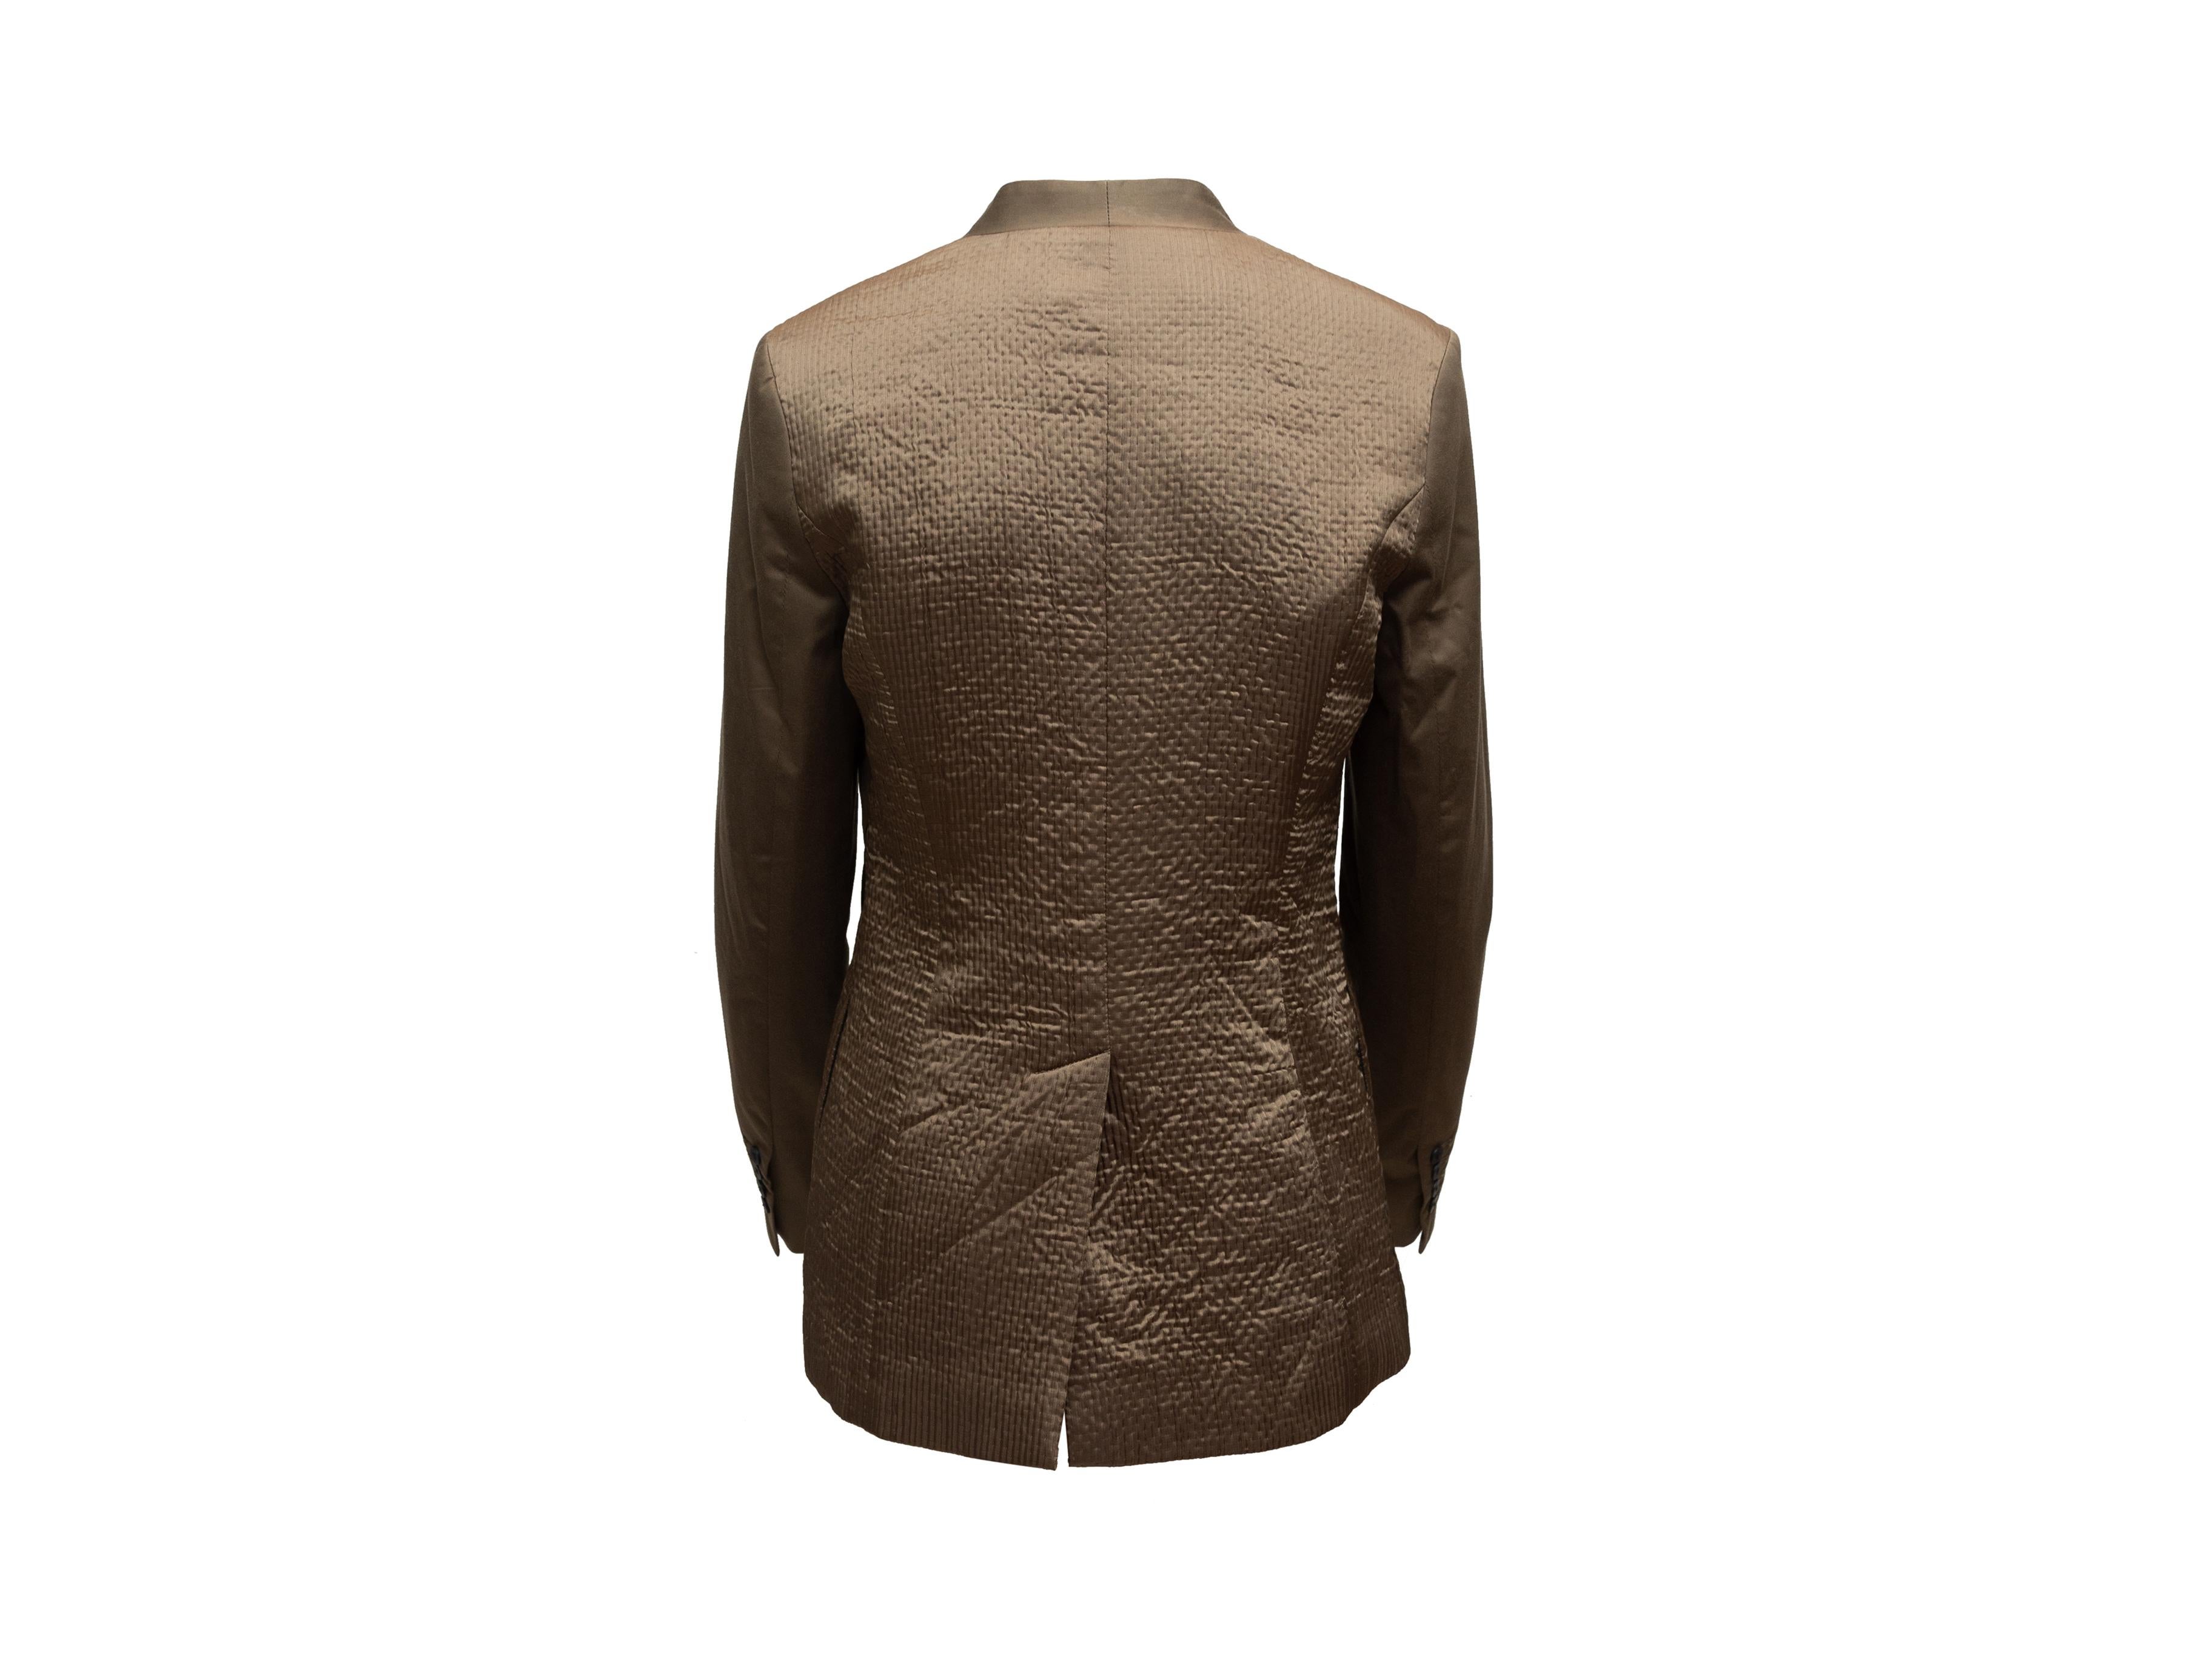 Product details: Brown satin collarless blazer by Kempner. V-neck. Quilted back panel. Hook-and-eye closure at front. 34